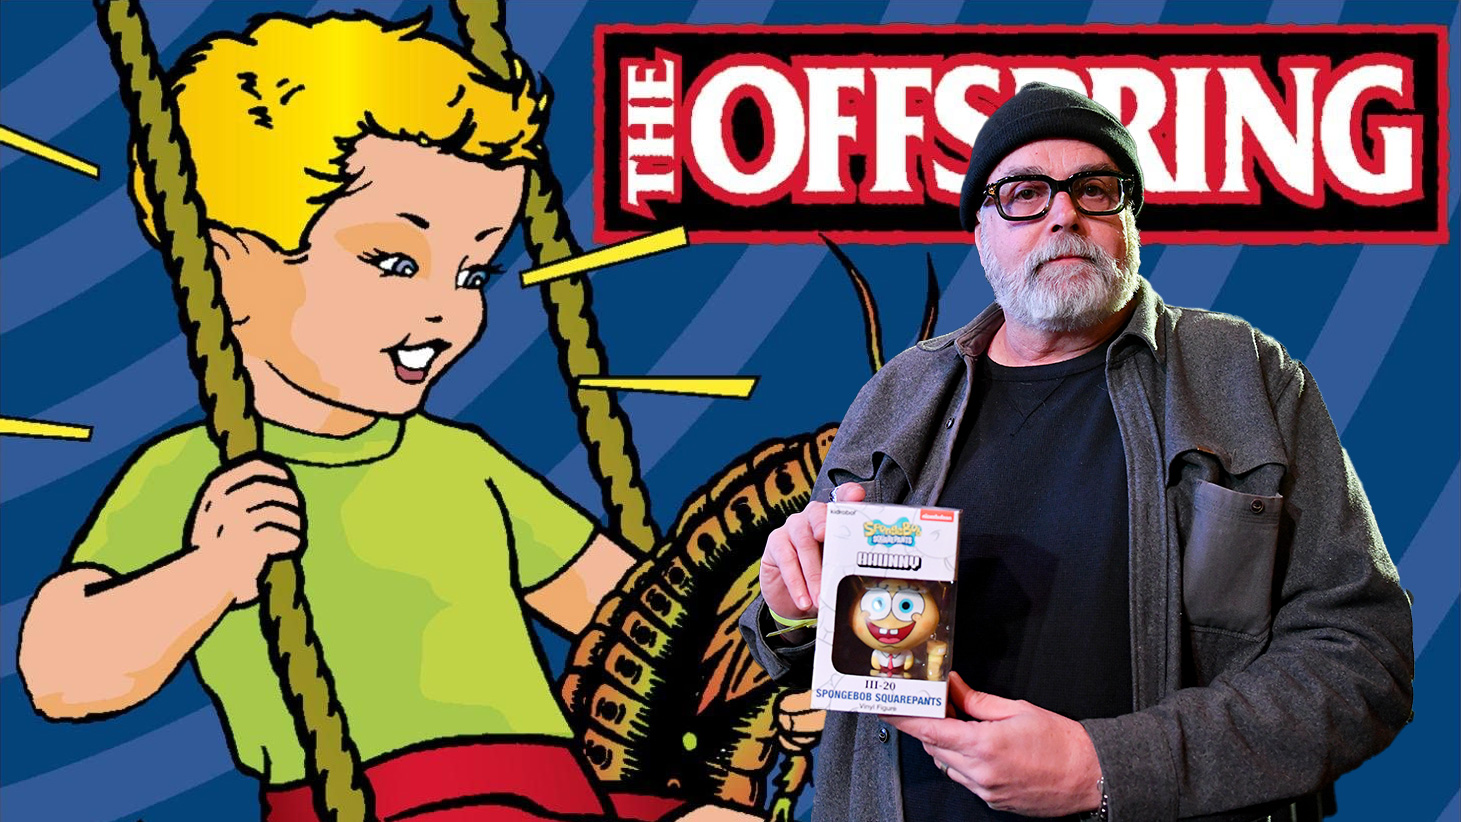 Frank Kozik, artist for The Offspring, Nirvana and Green Day